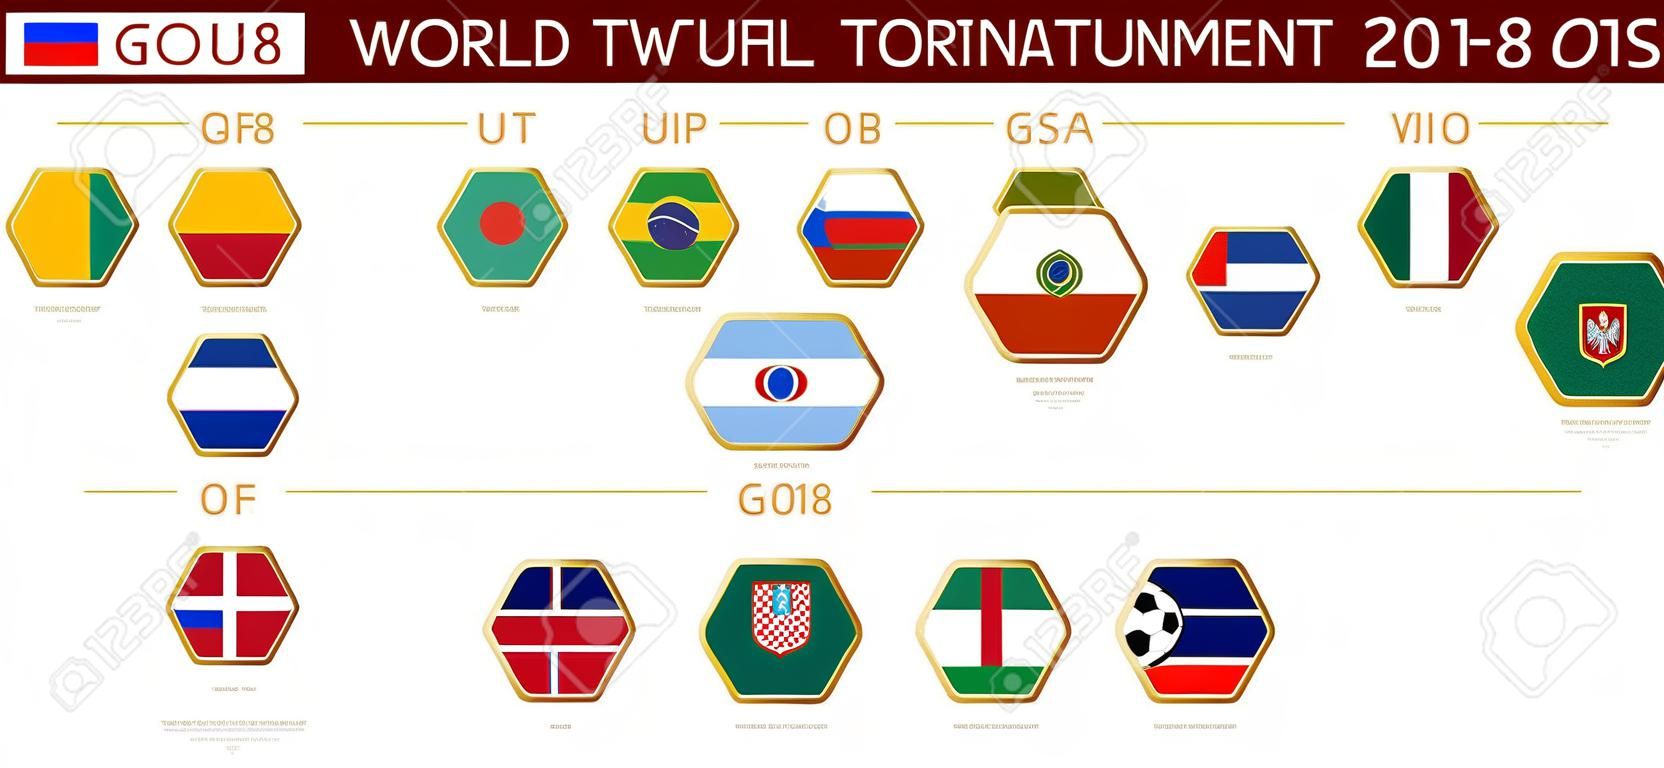 Football world tournament 2018 in Russia, flags of all participants by group 